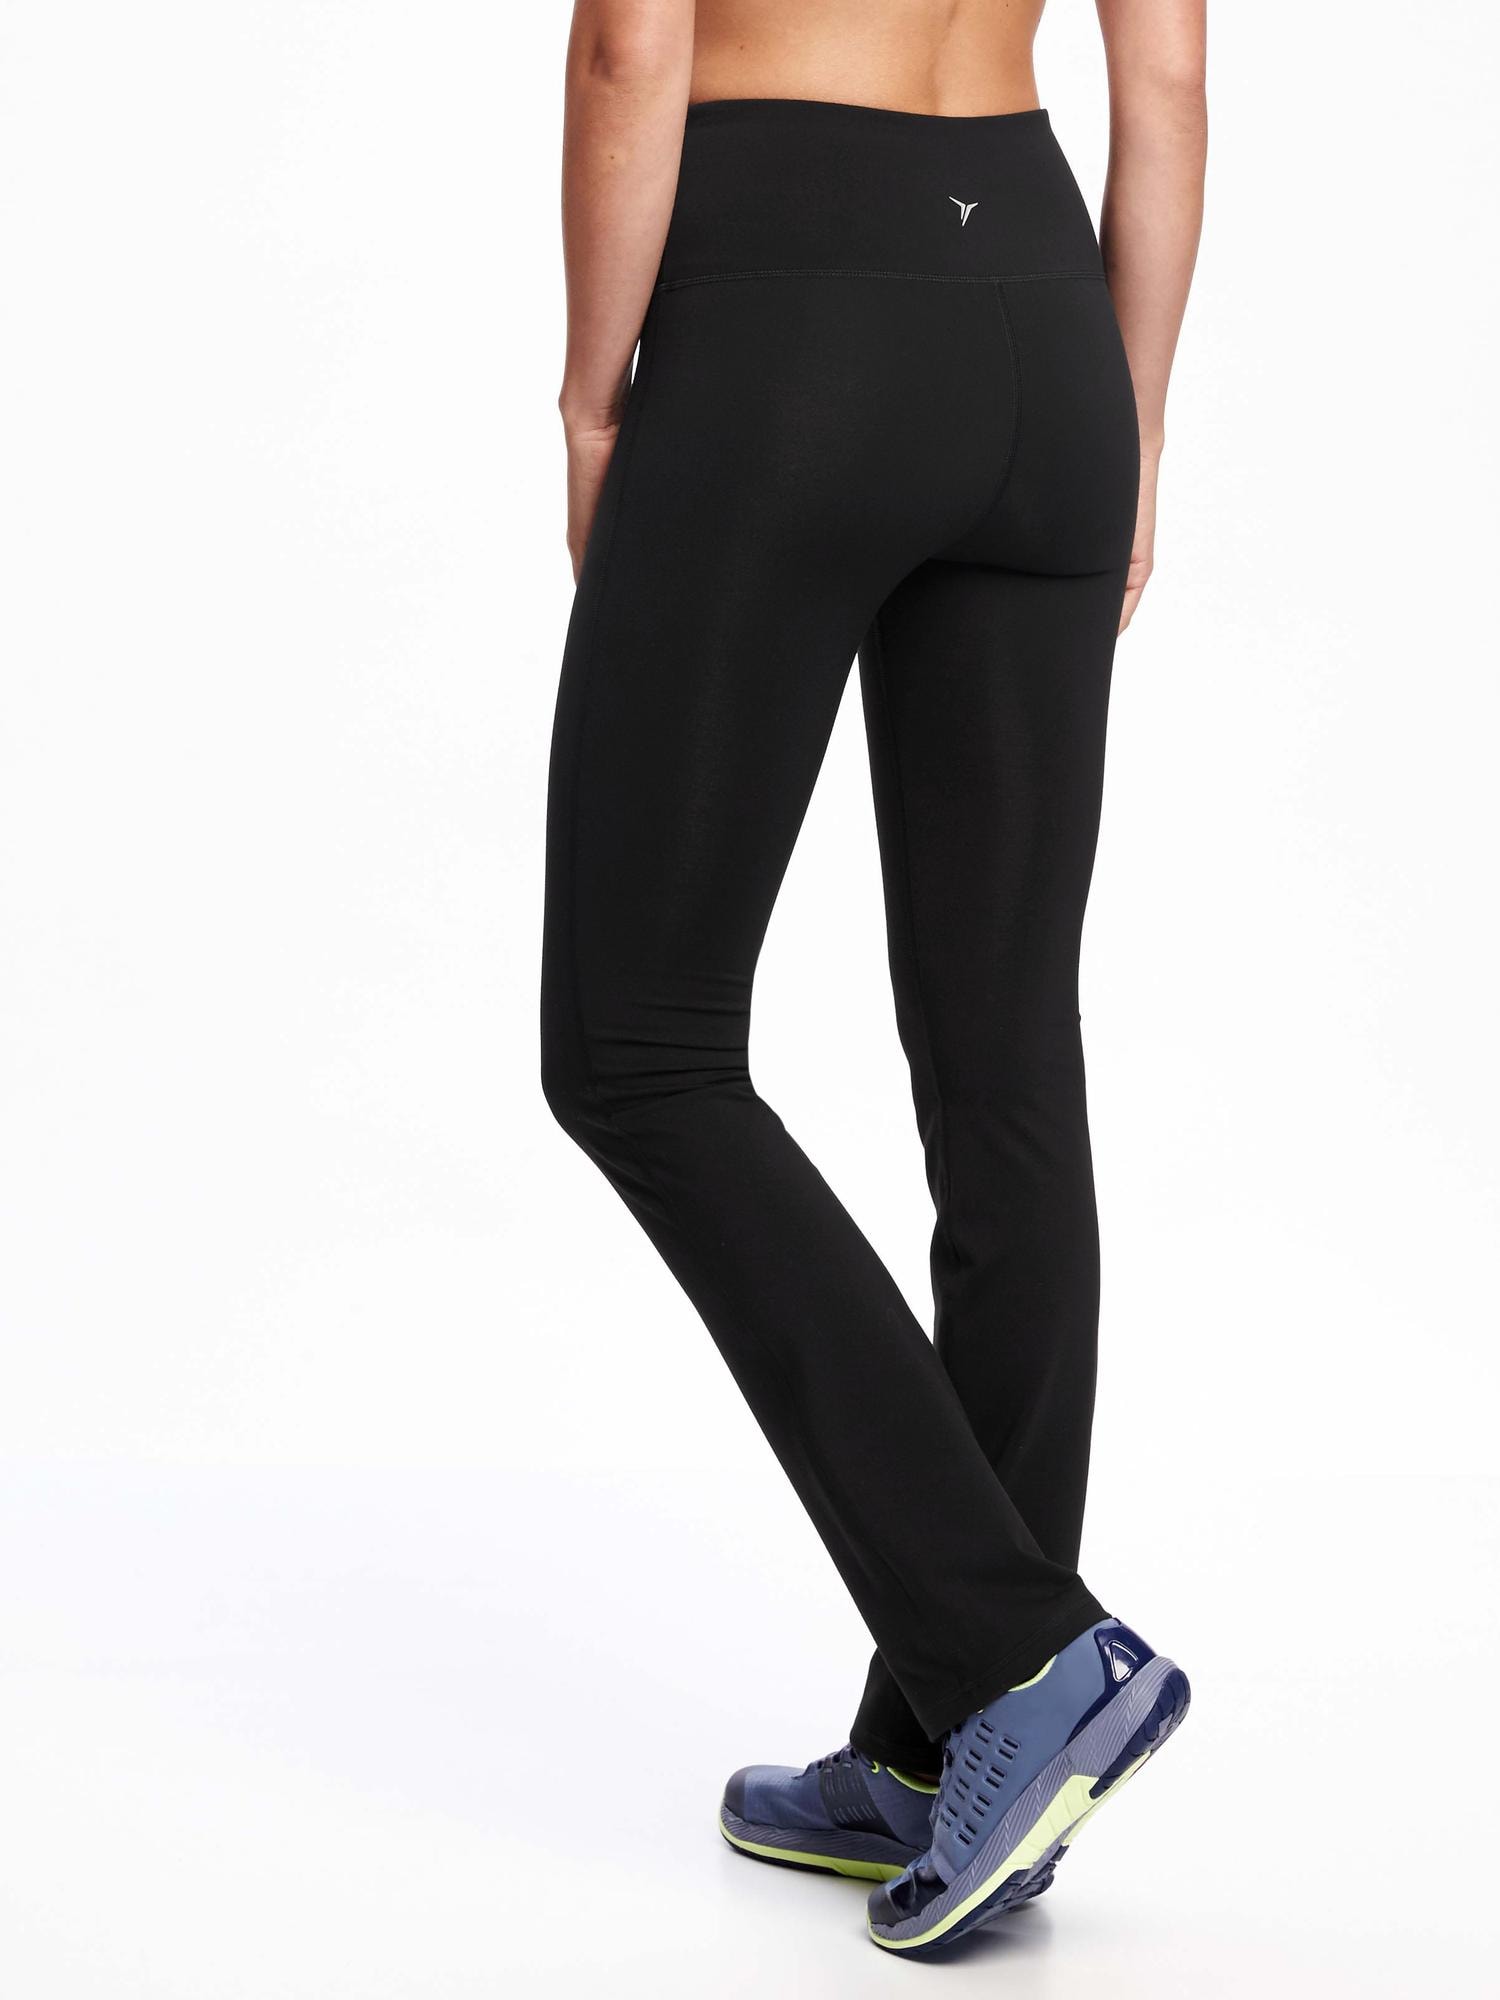 Elevate your workout with our stylish compression leggings